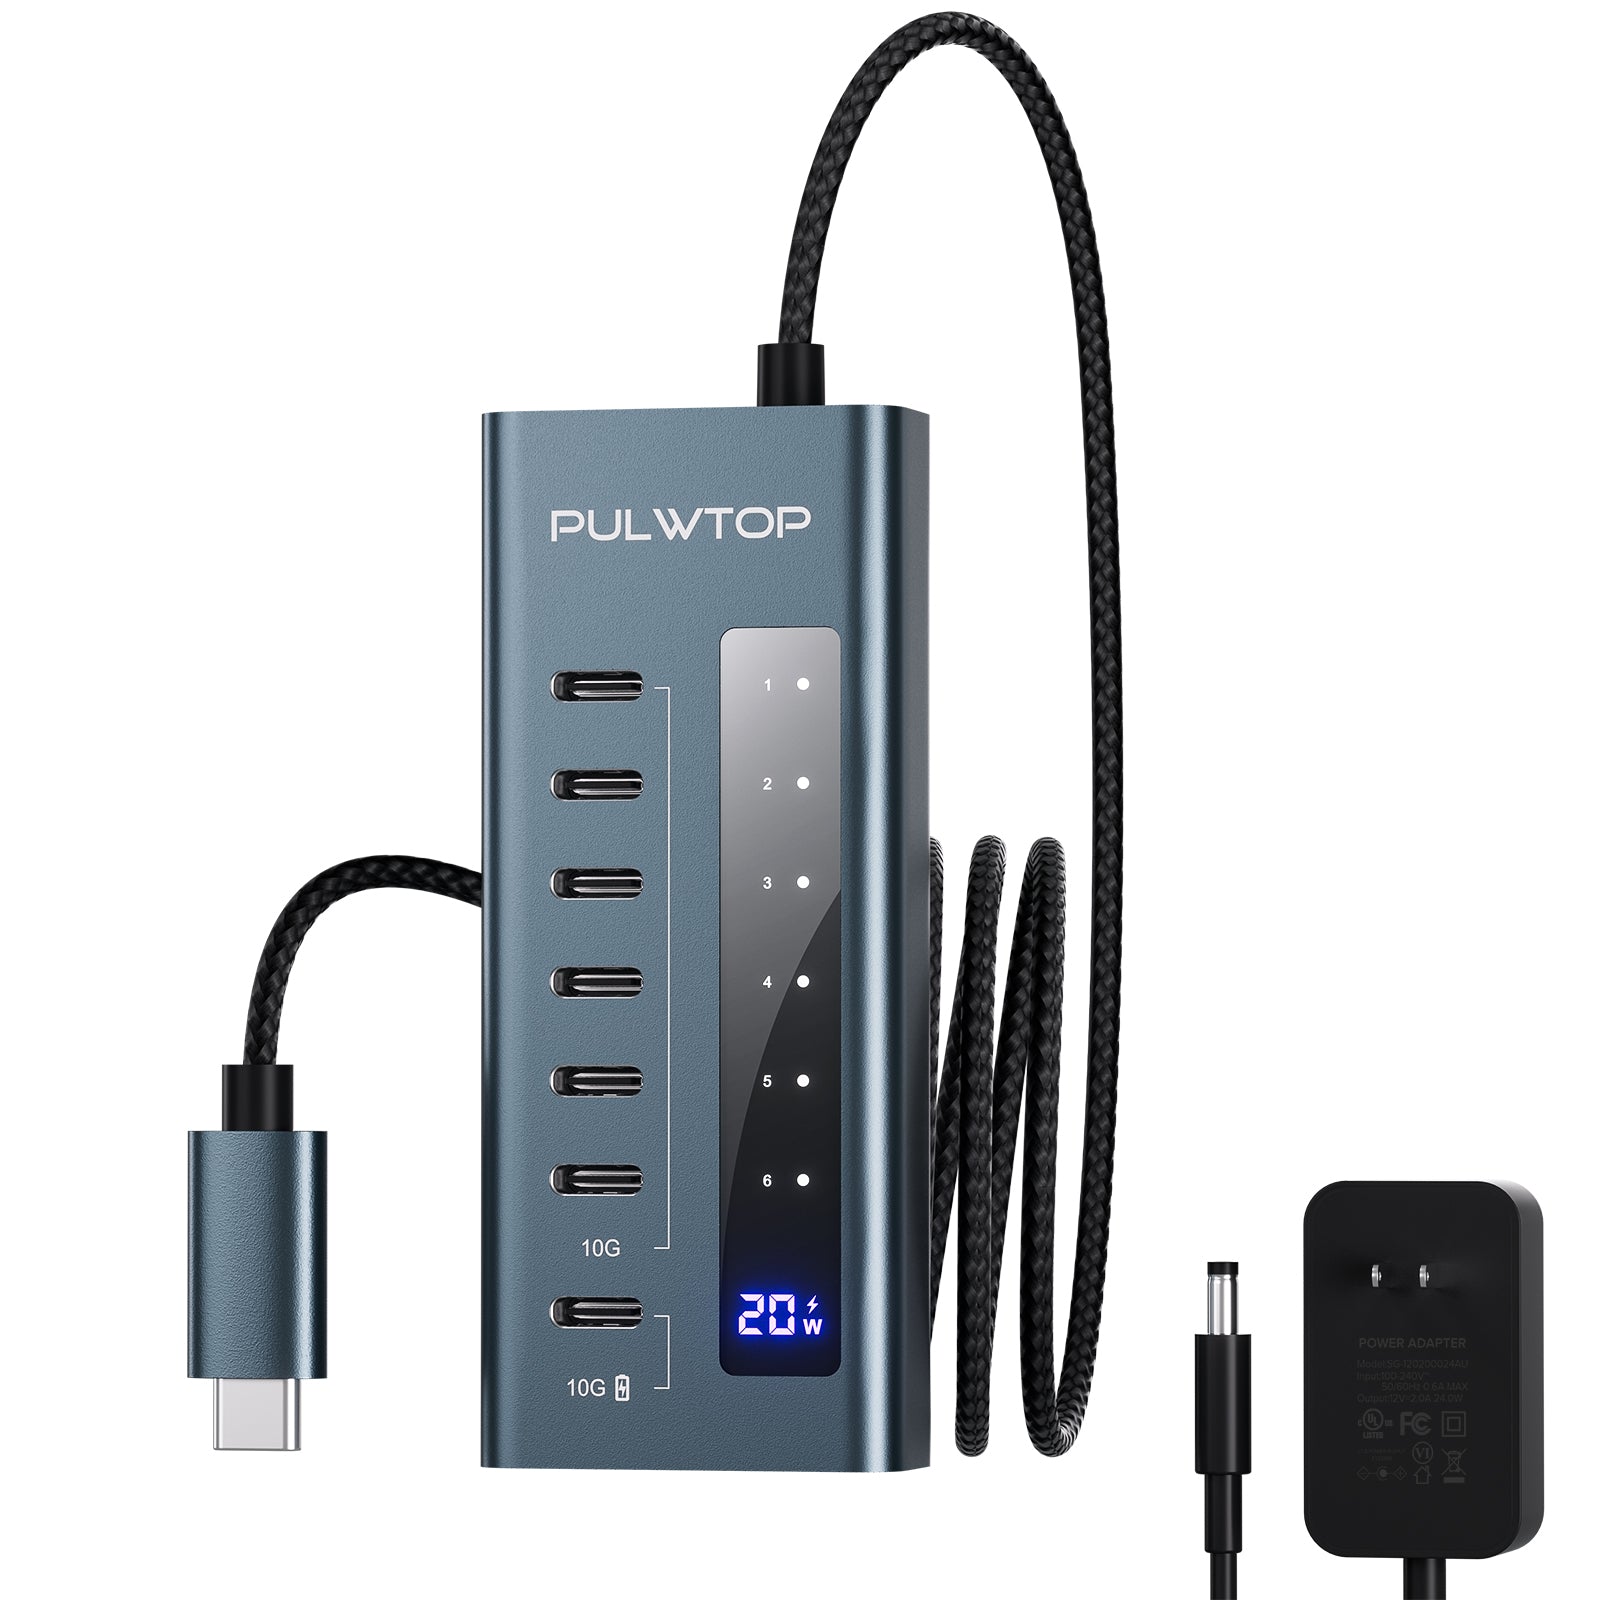 PULWTOP 7-in-1 10Gbps USB C supports data and charging (non-video) for iMac, MacBook Pro/Air, iPad, XPS